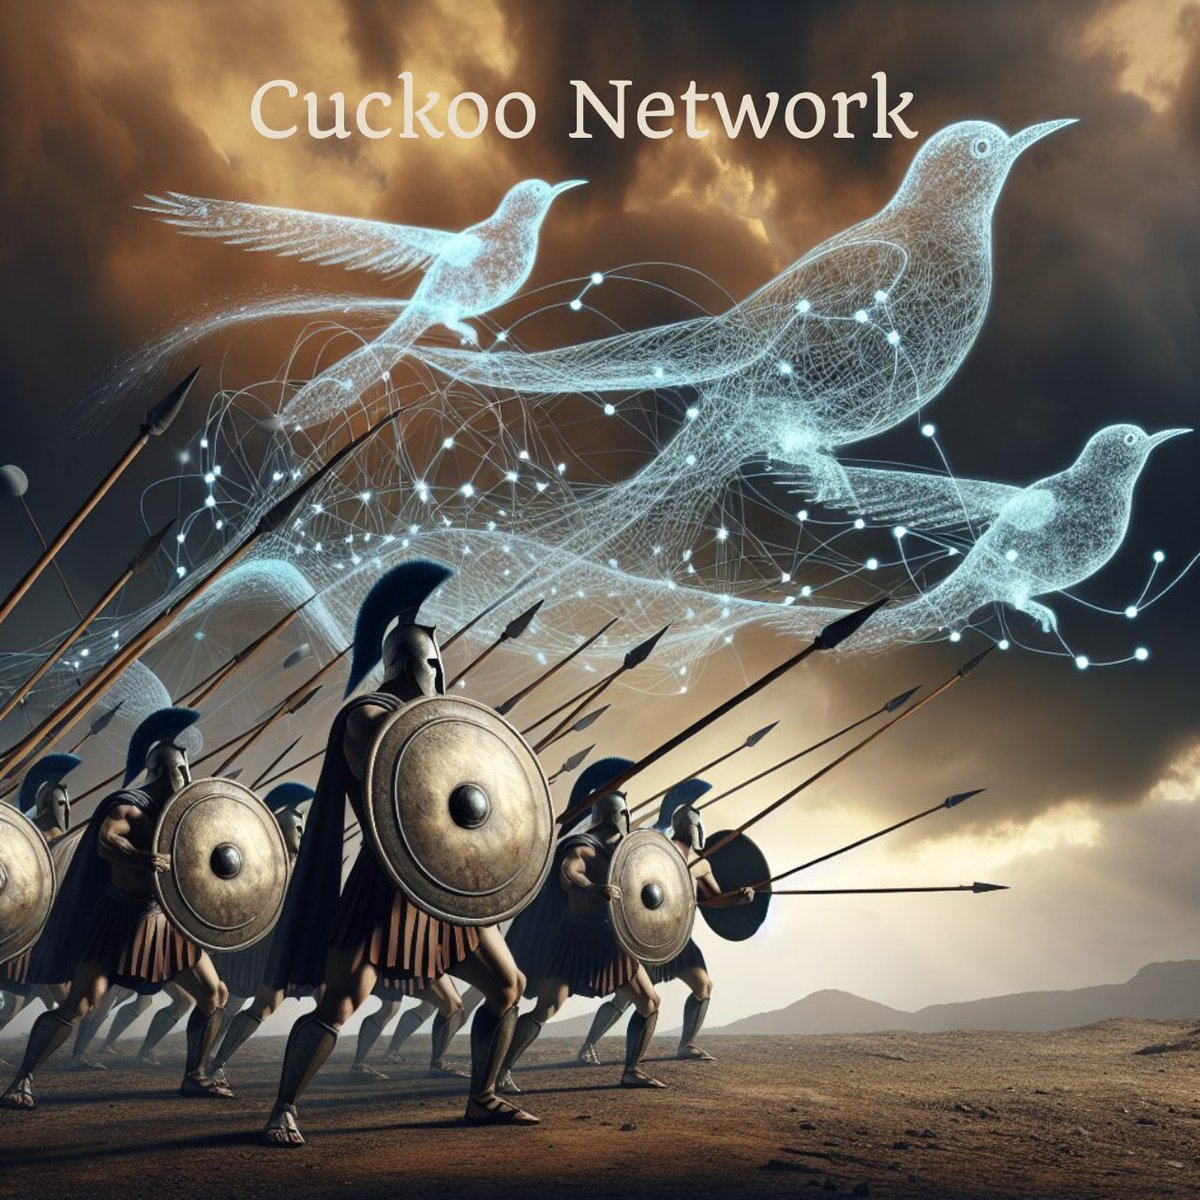 ## Anyone can mine CK Coin

Fair distribution. No insiders or investors. 100% community mining

Everything is transparent: the more friends you bring, the more CK Coin you get

Invite friends, form a team, and let's work together to reach the top

Join Cuckoo Network now and…